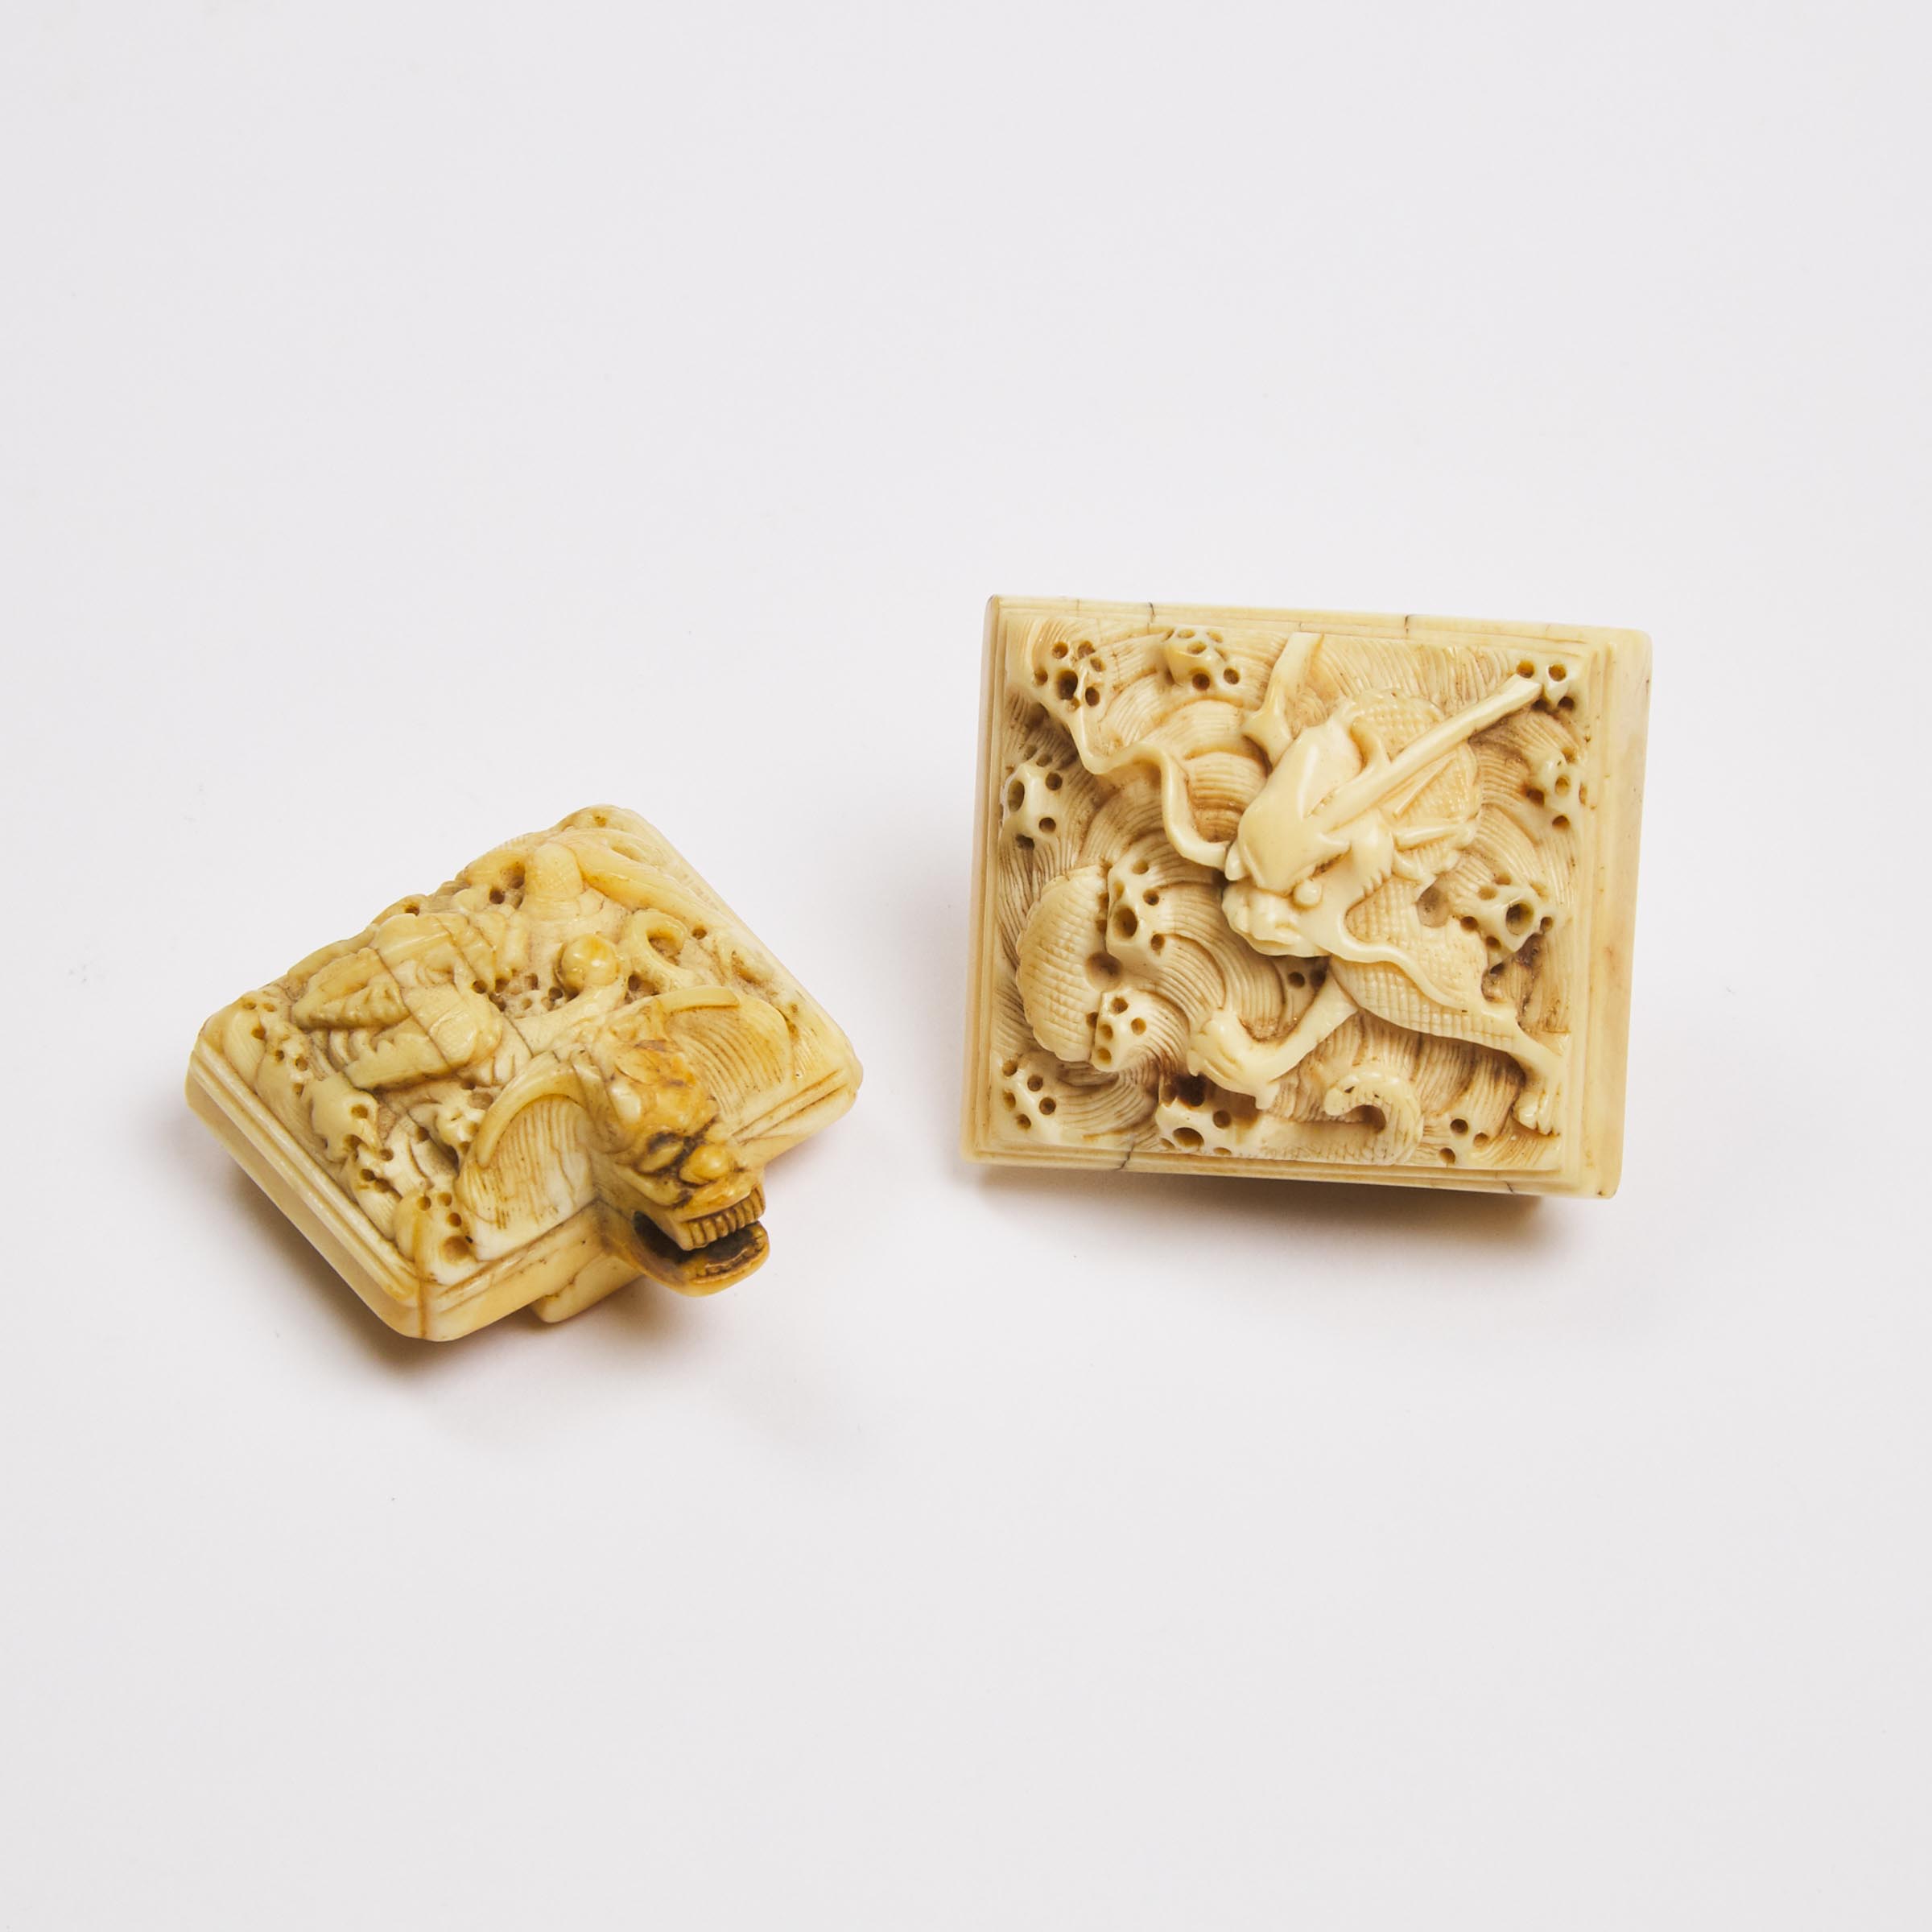 Two Chinese Carved Ivory Belt Buckles, 18th Century